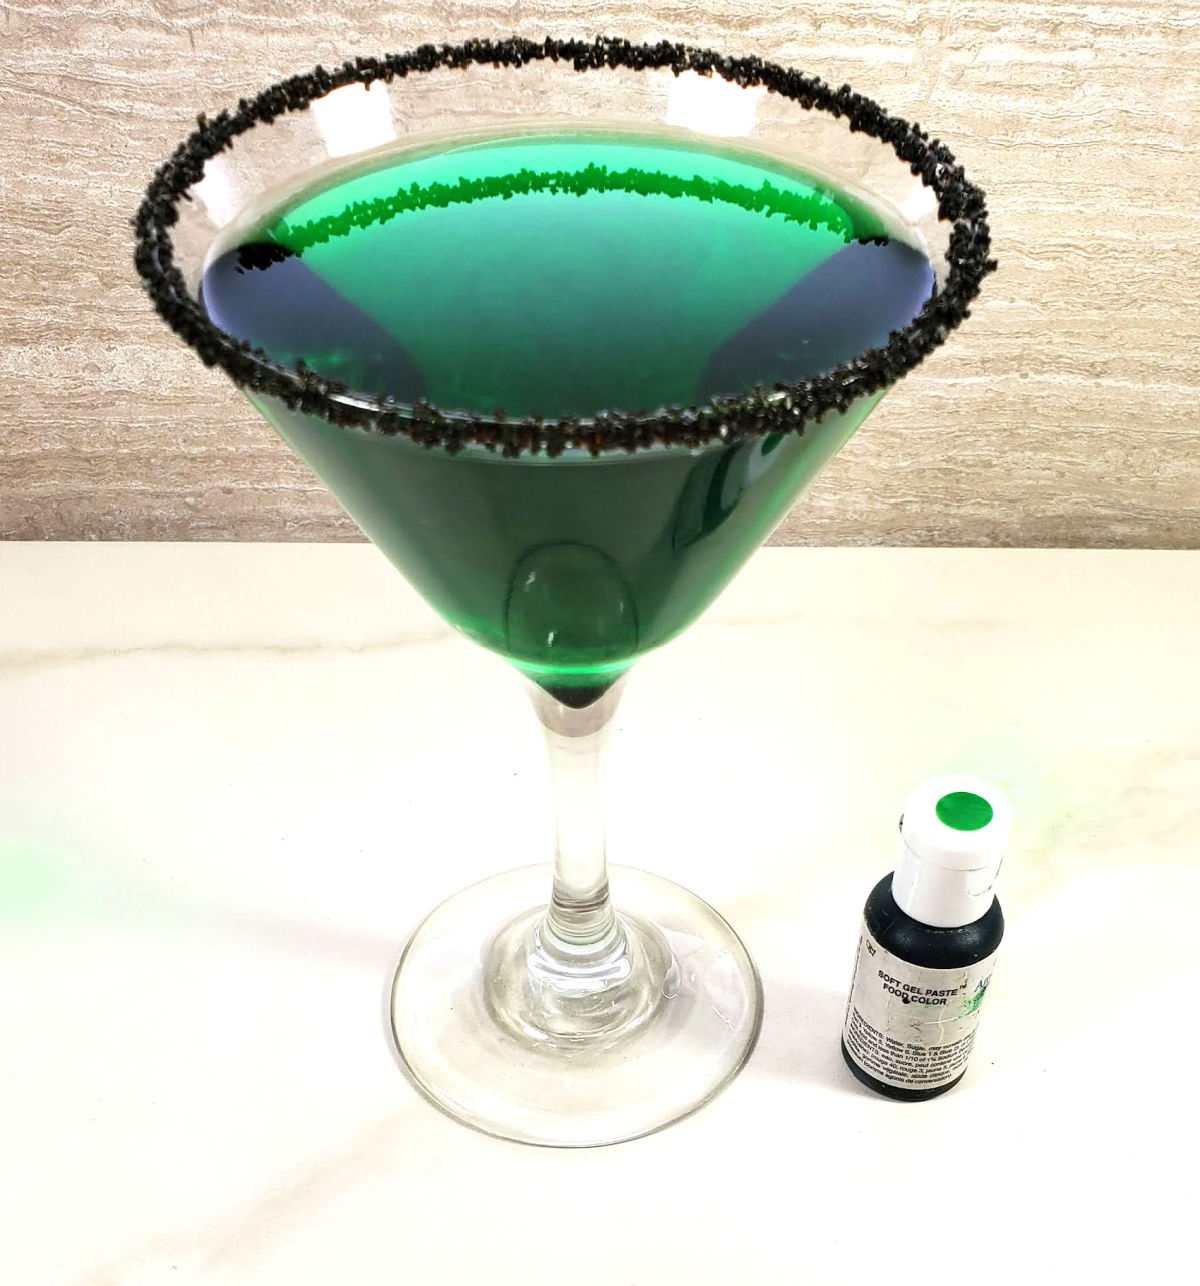 Green food coloring next to a green martini drink with a black rimmed glass.